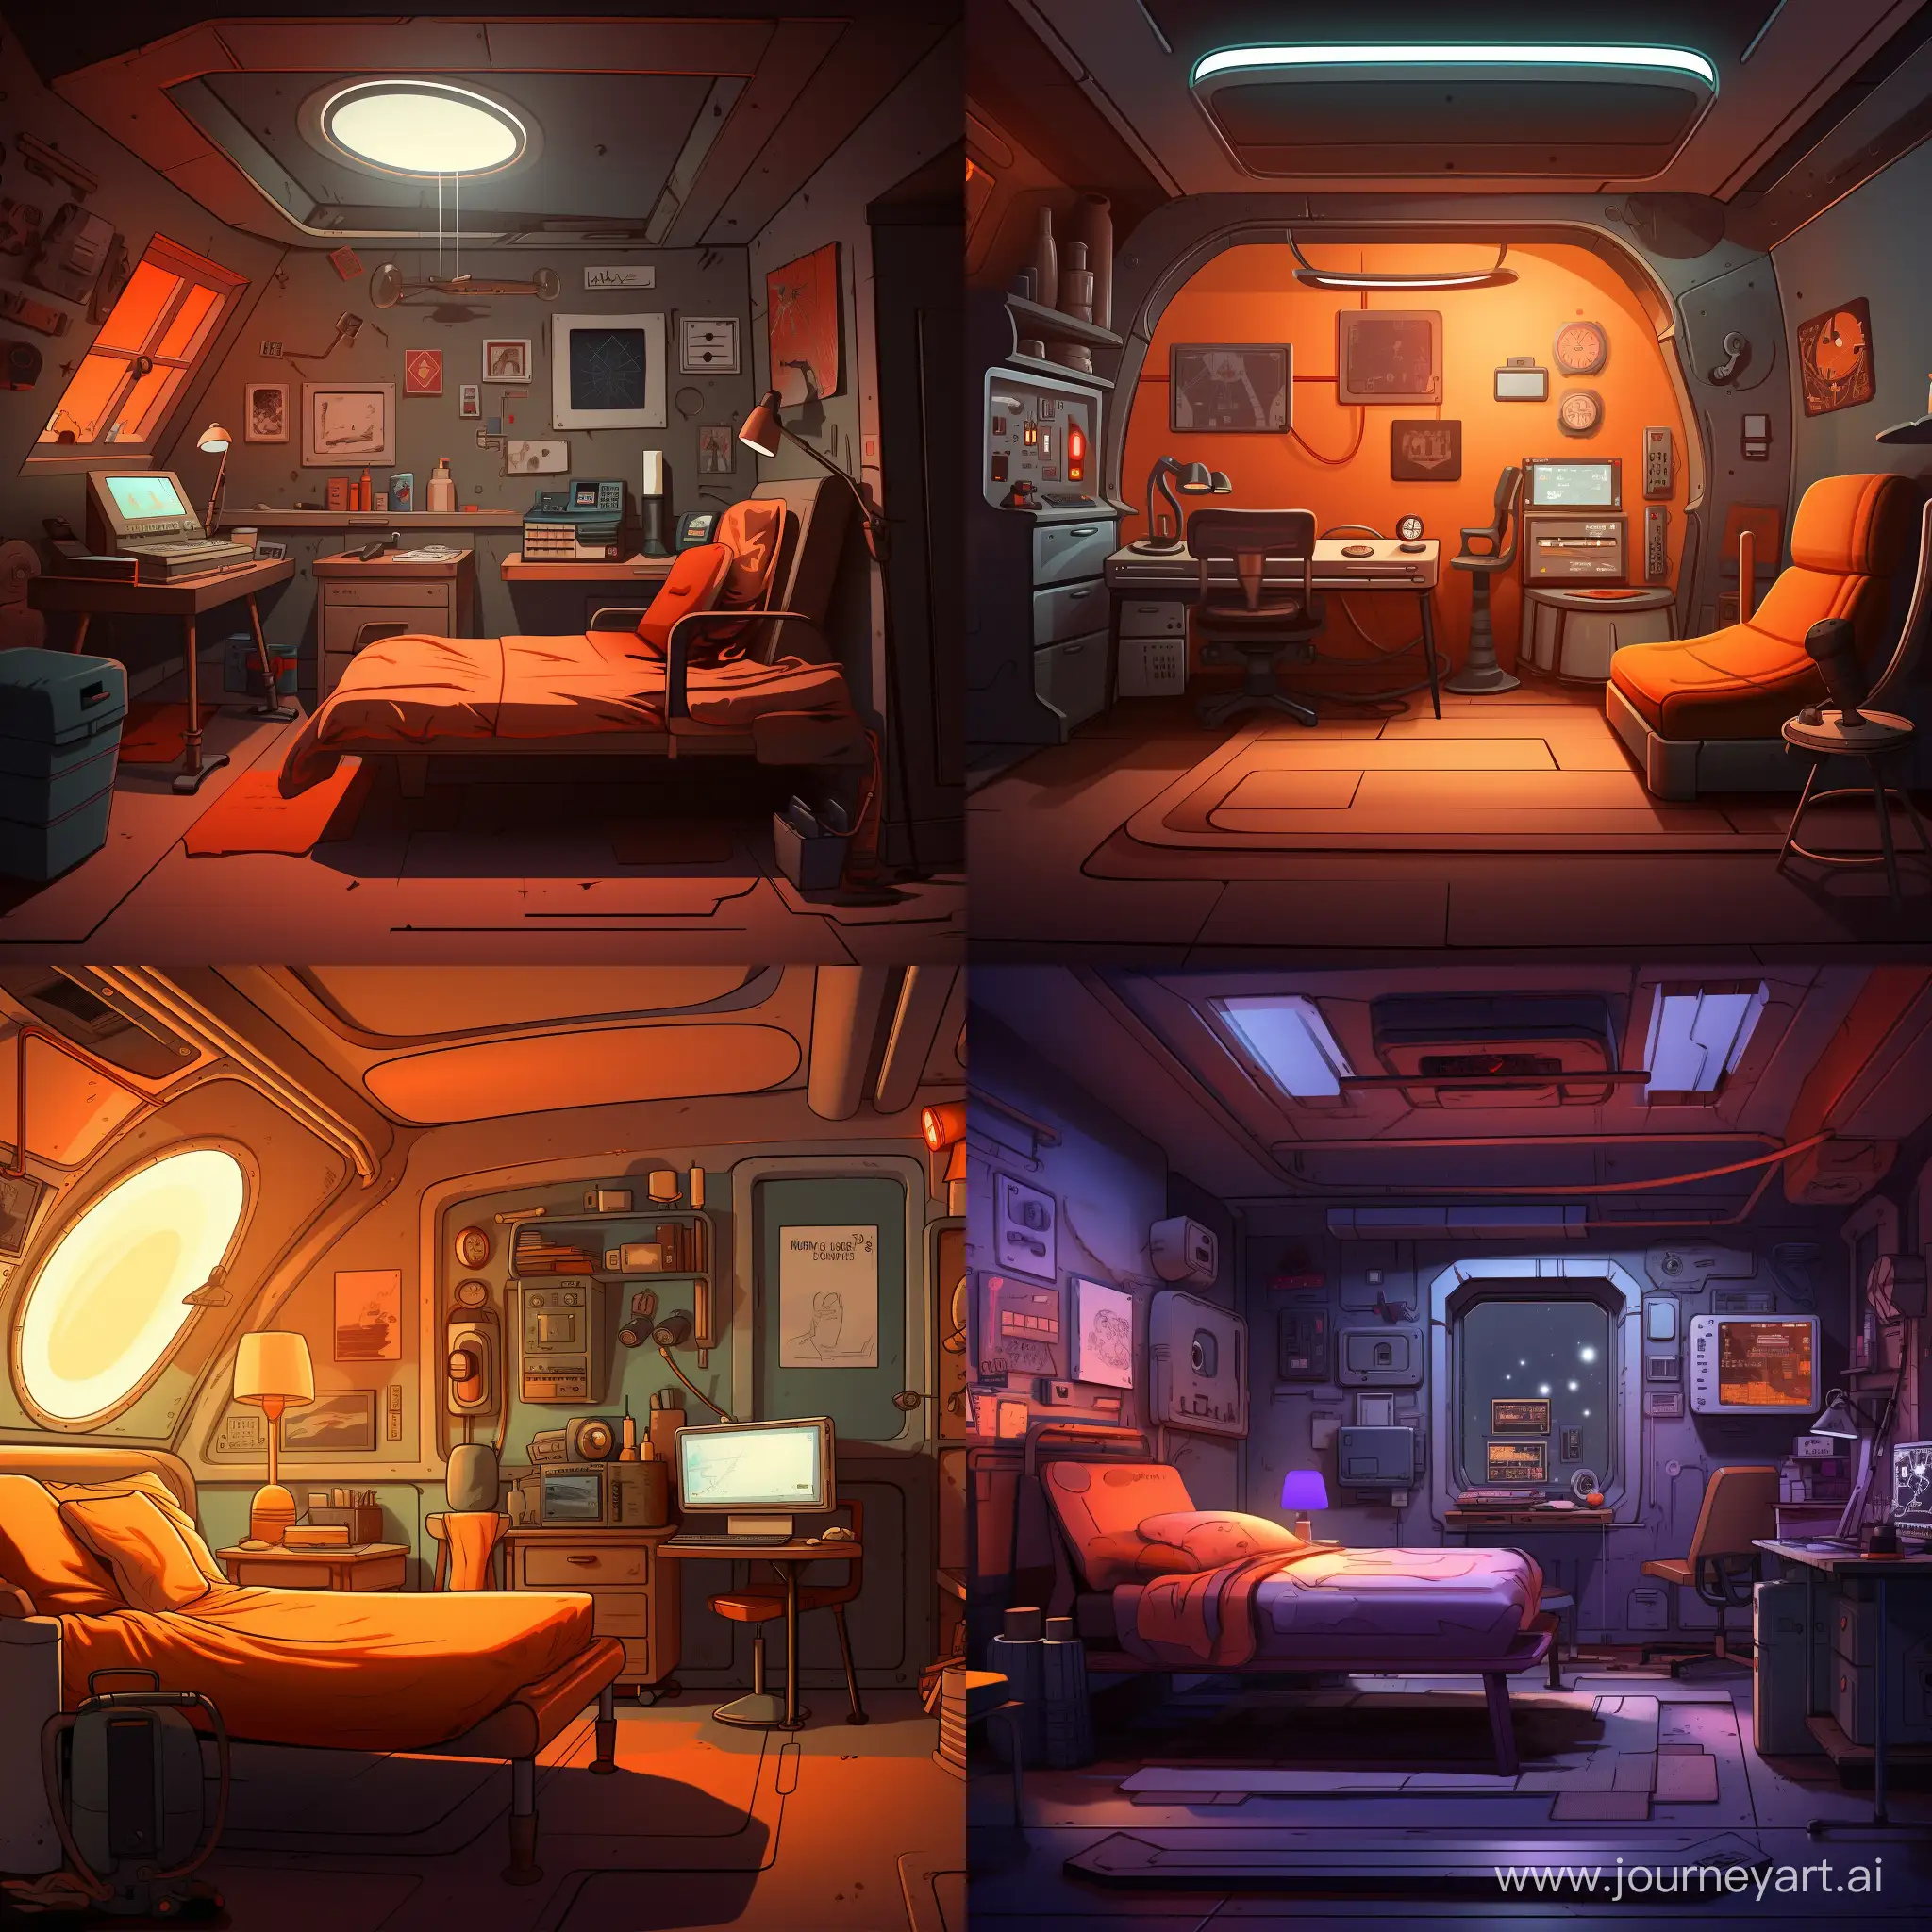 Cozy минималистичная крохотная dark room космического корабля in retro futurism style. There is a carefully made bed against the left wall, and a little to the right is a work desk with many mechanisms, diagrams and parts, tools. There is a table lamp on the table, emitting a warm, dim light. She is the only source of light in the room. Офисный стул перед рабочим столом. Старые металлические стены и пол.